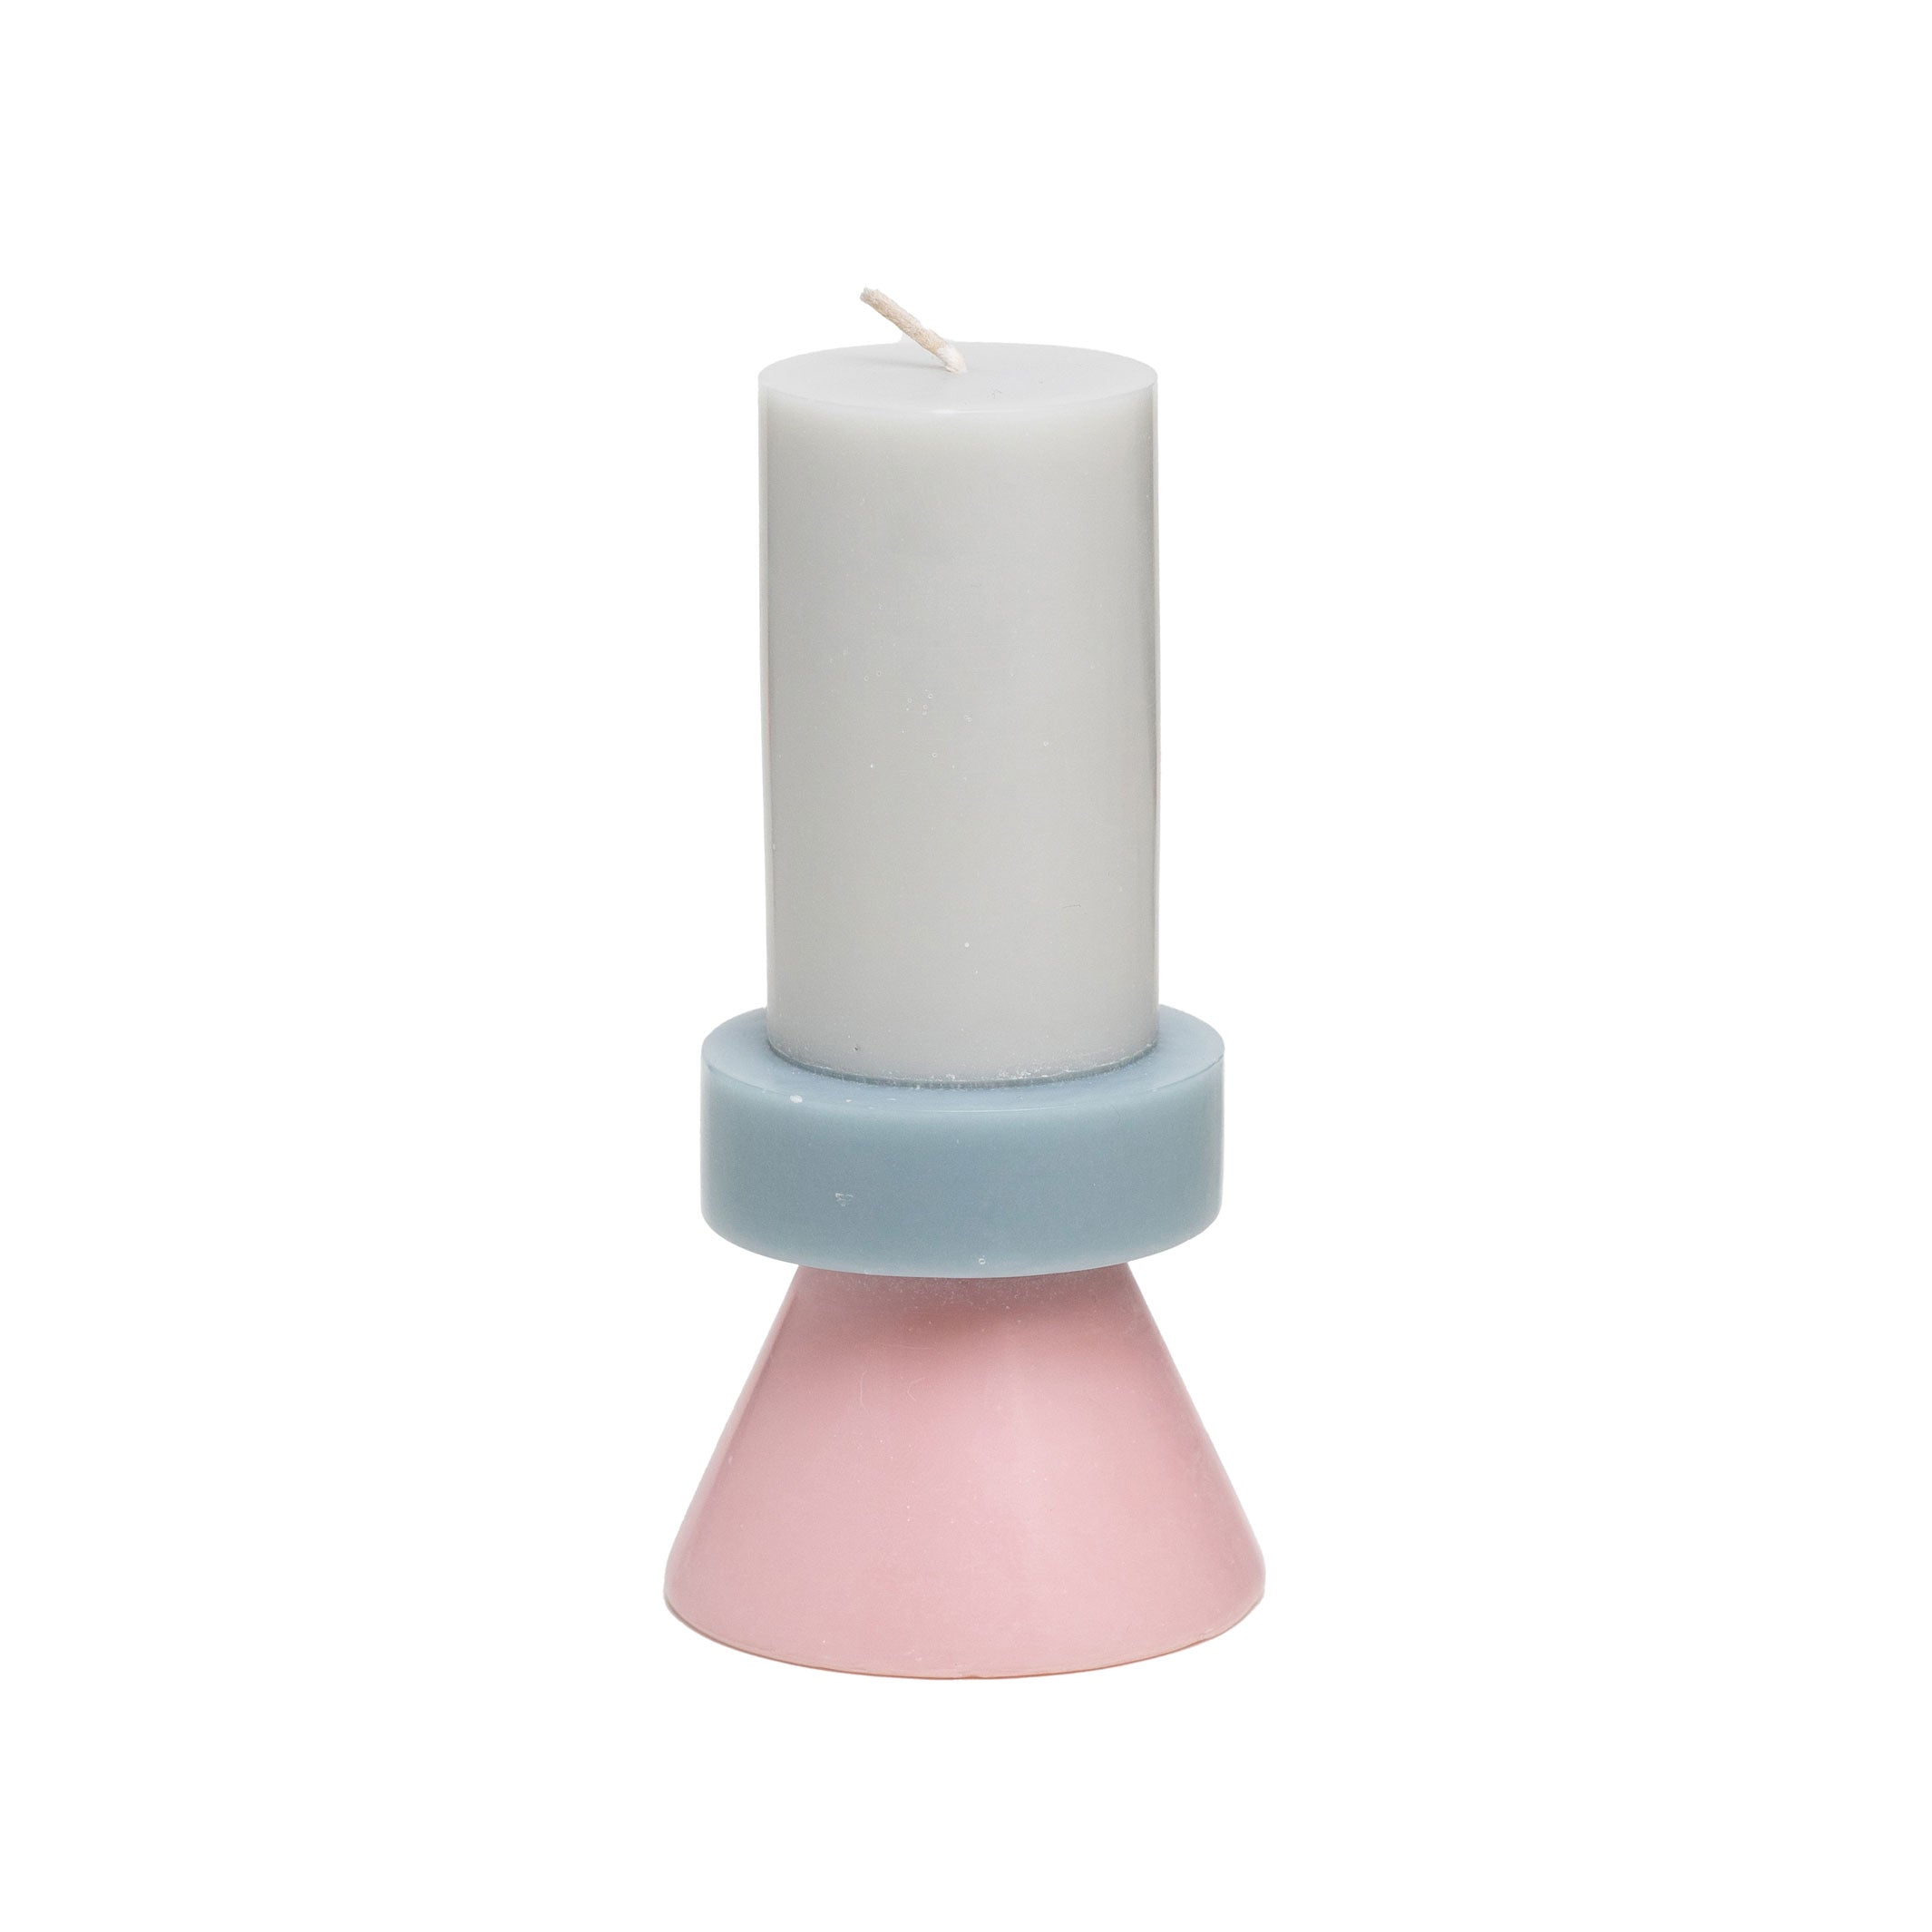 STACK CANDLE TALL | Colors lightgrey-pastelblue-softpink | 30 hrs. burning time | YOD AND CO